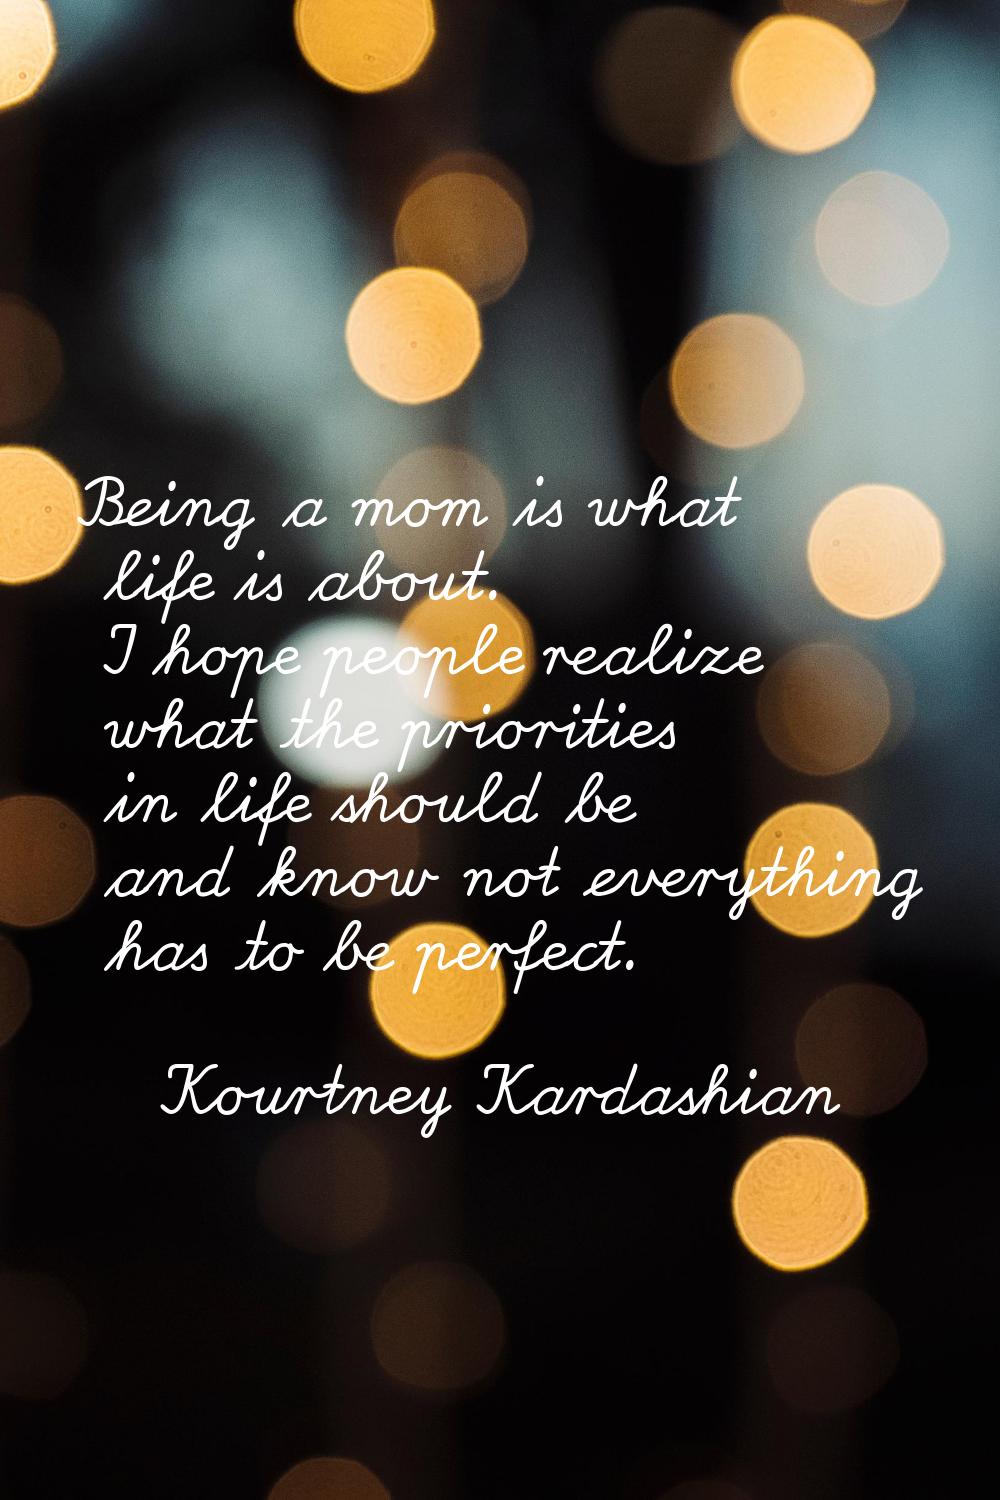 Being a mom is what life is about. I hope people realize what the priorities in life should be and 